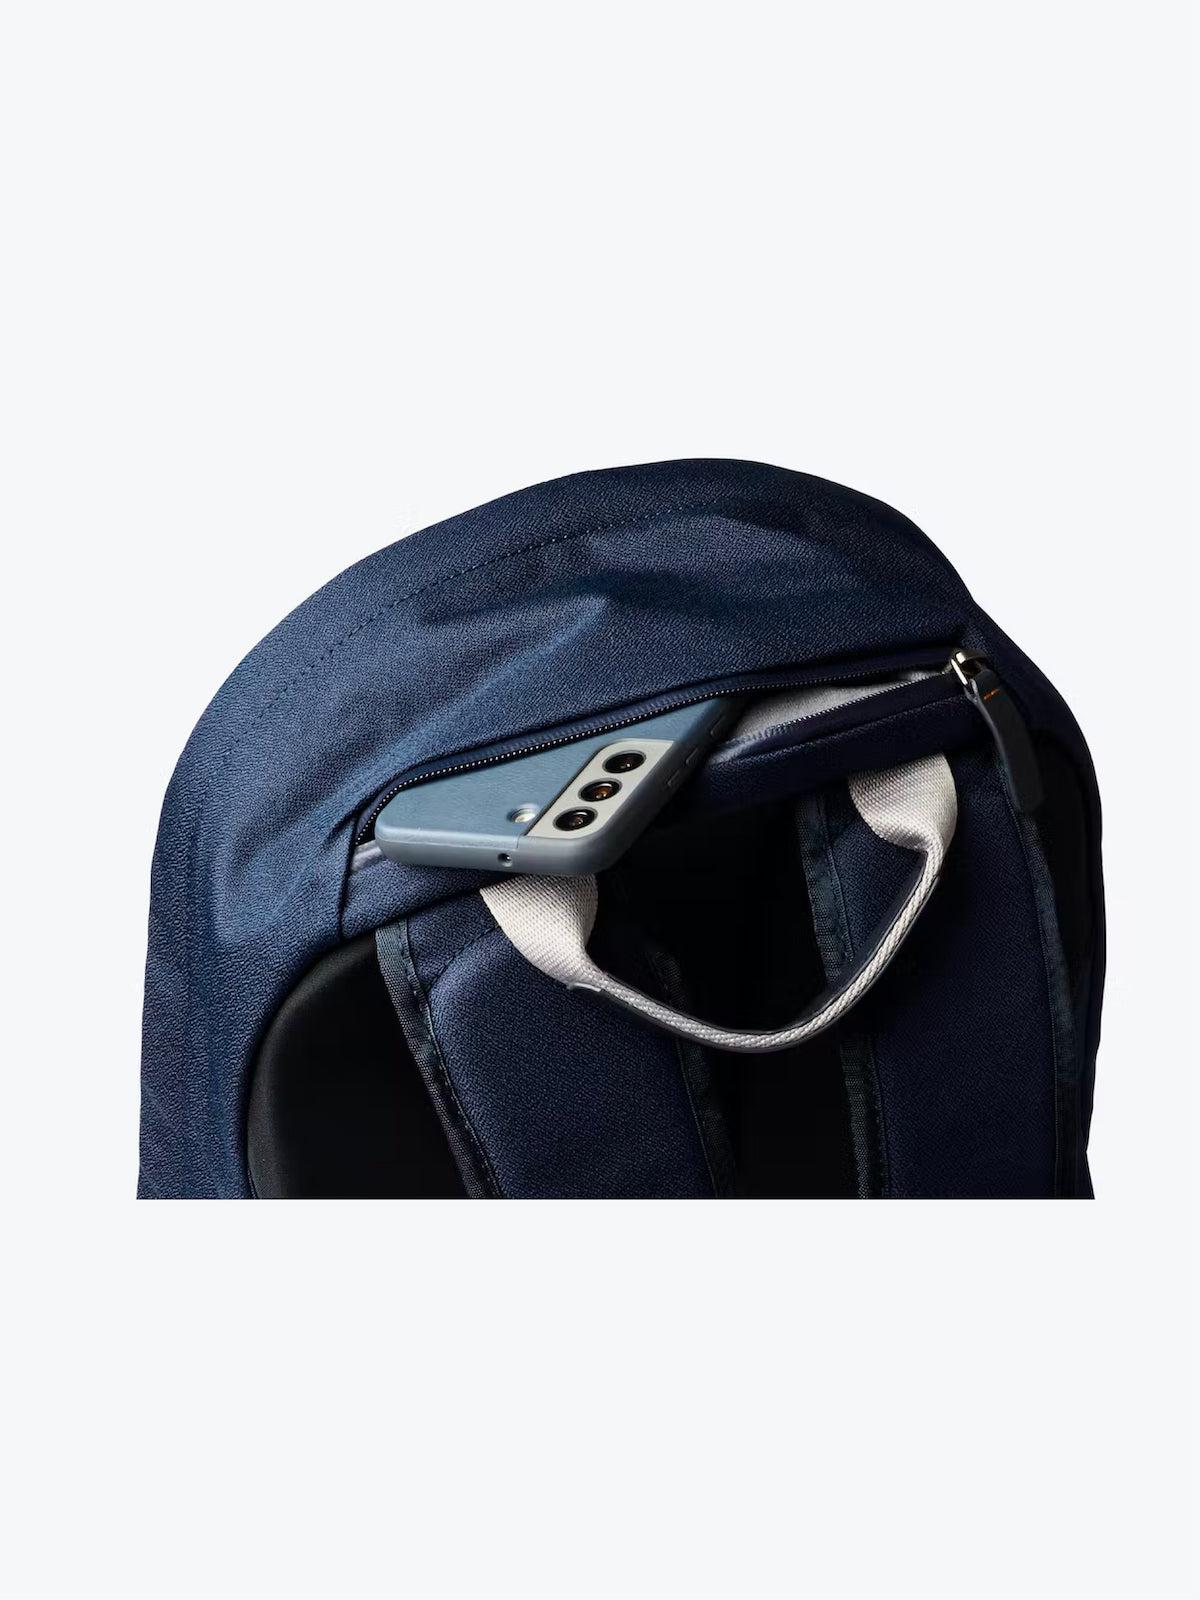 Bellroy Classic Backpack Navy